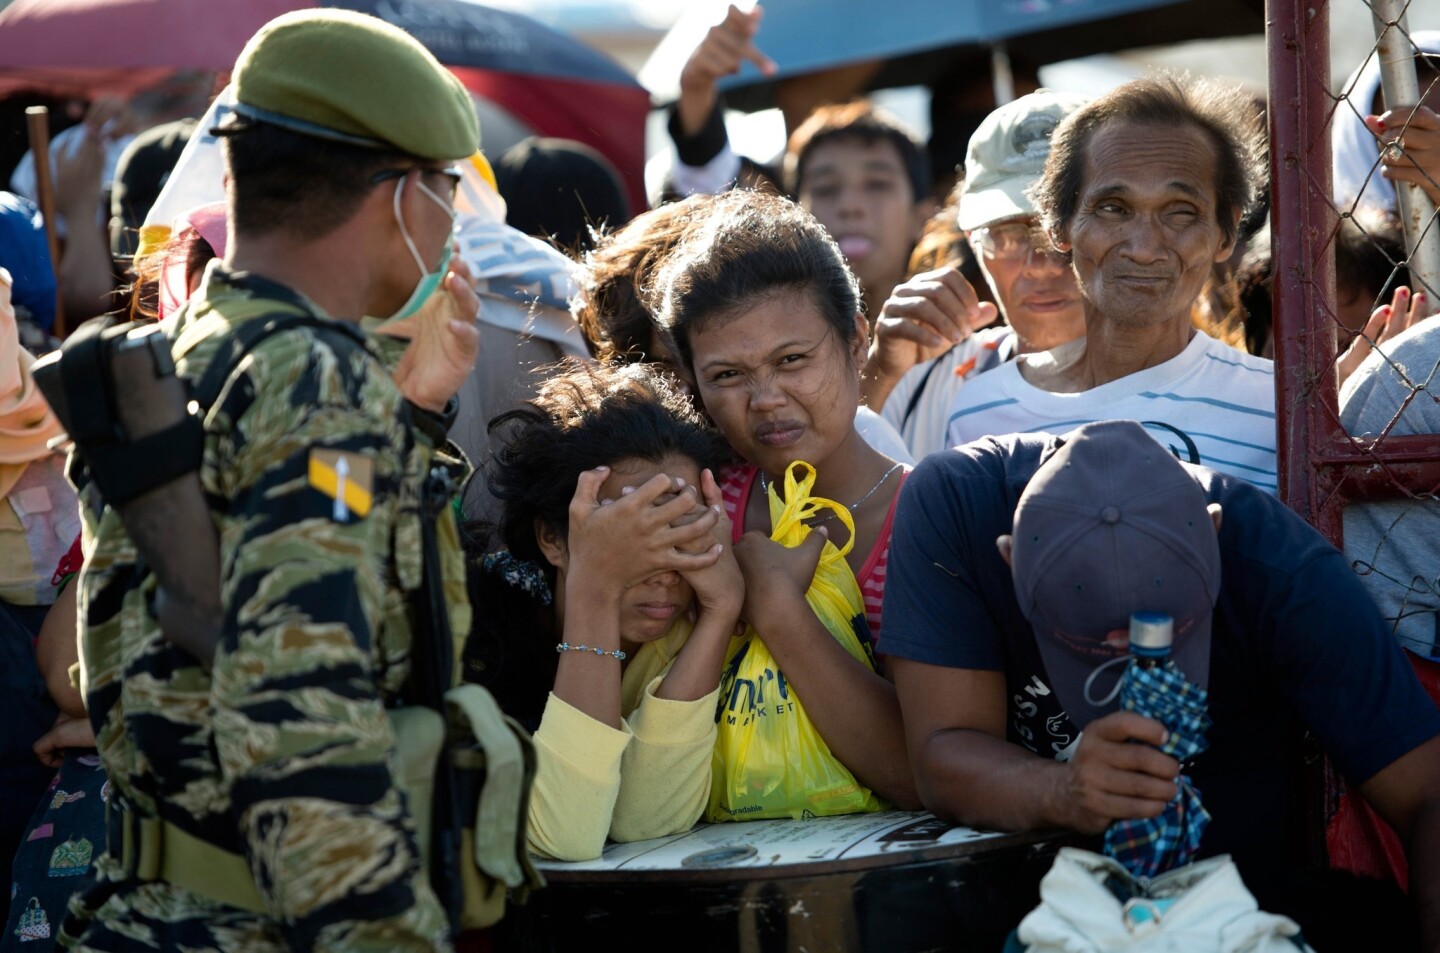 Residents wait to be evacuated at the airport in Tacloban, Philippines, which was devastated by Typhoon Haiyan.